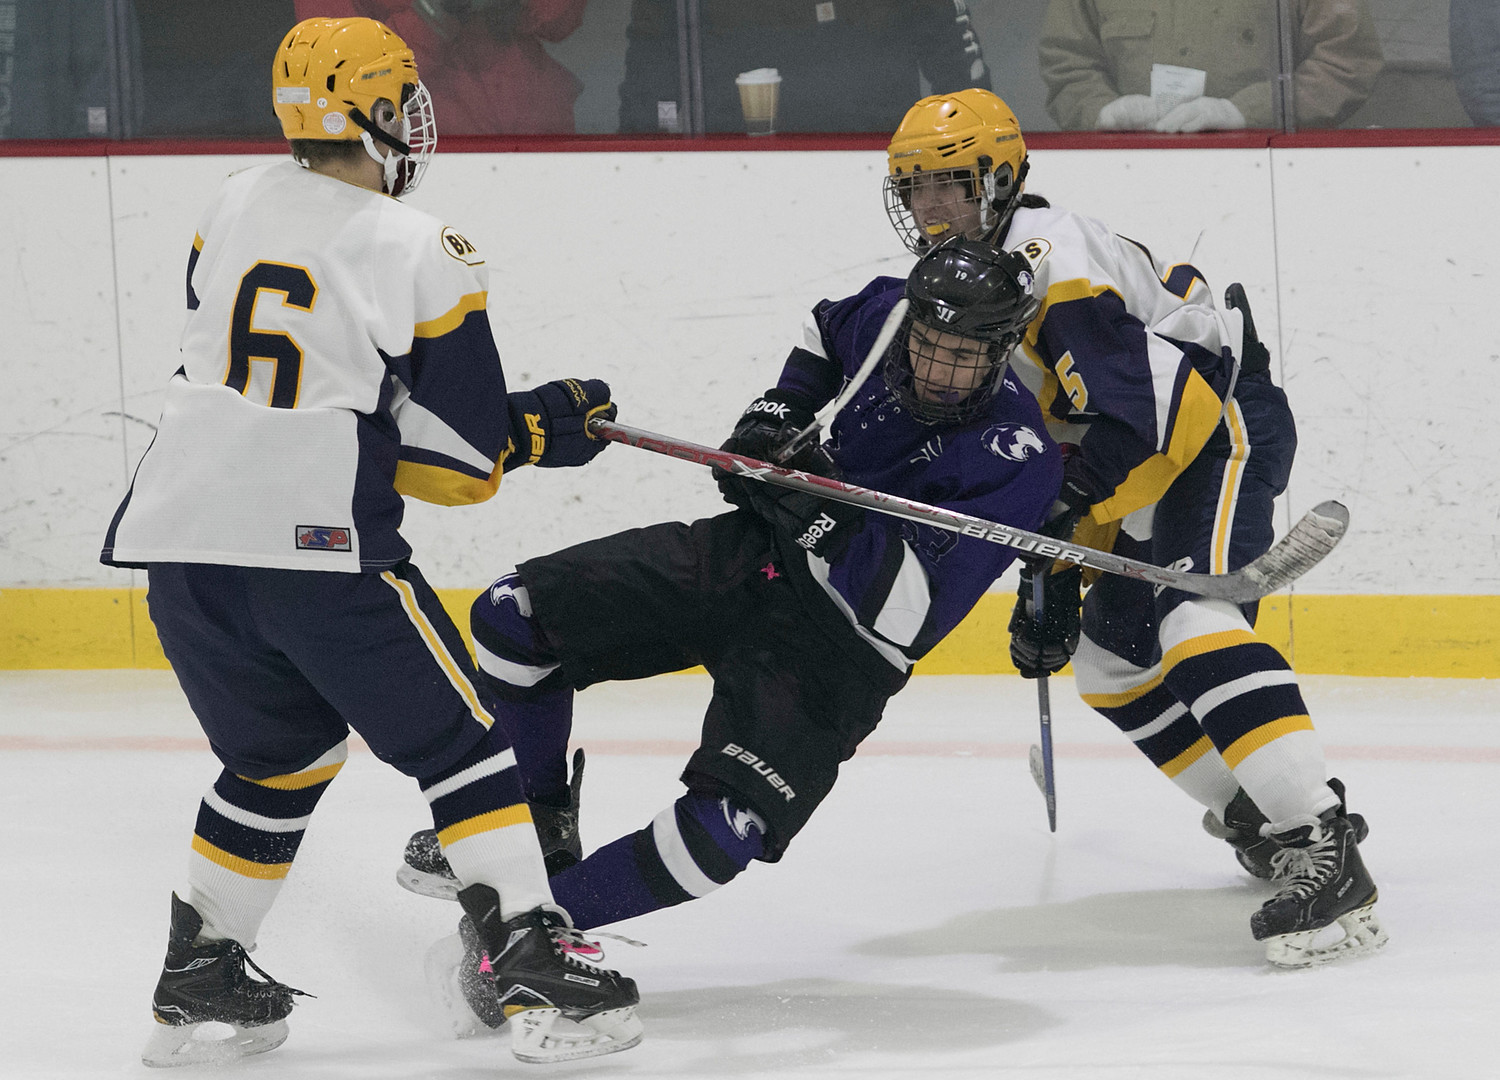 Senior center Kyrik Cordeiro is helped to the ice by a pair of Barrington defenders.